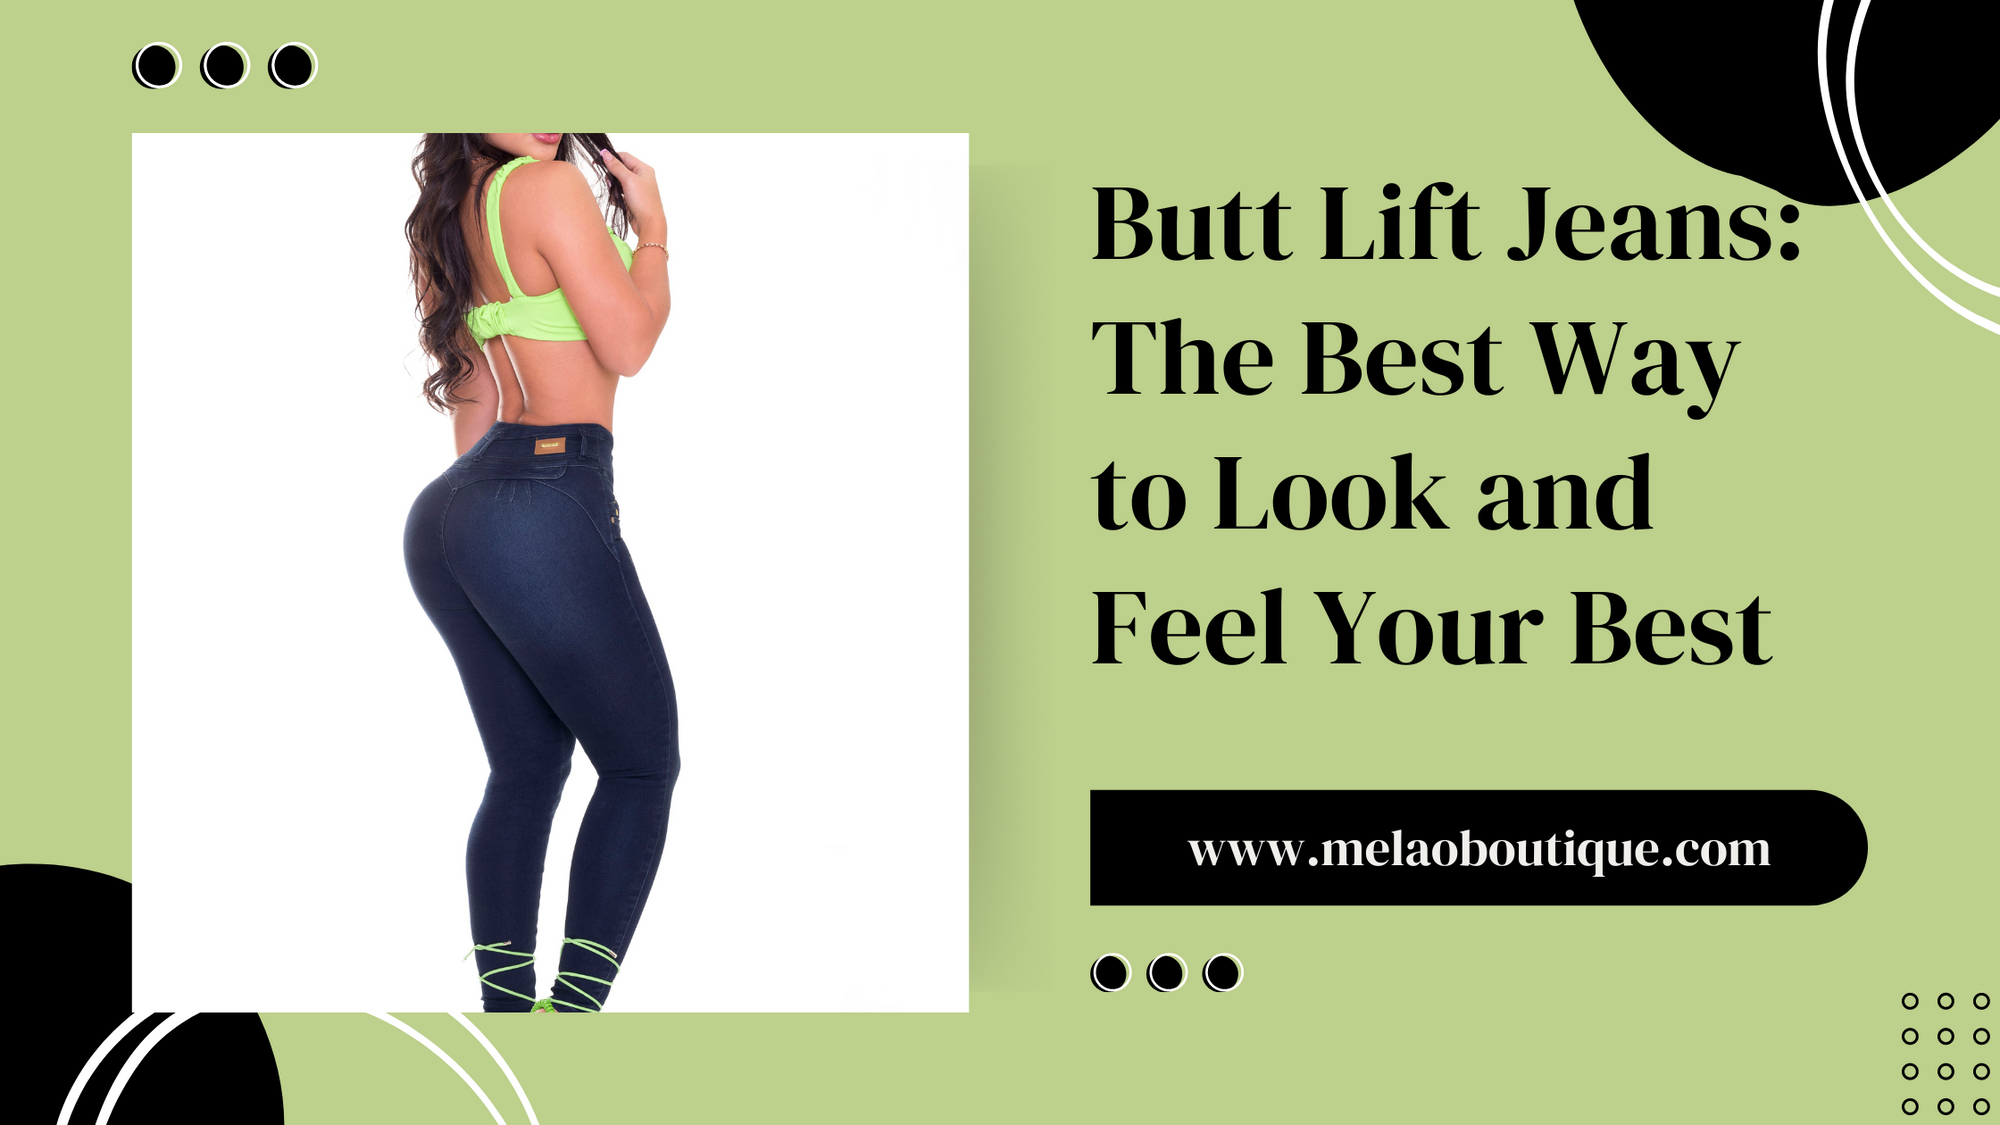 Butt Lift Jeans: The Best Way to Look and Feel Your Best